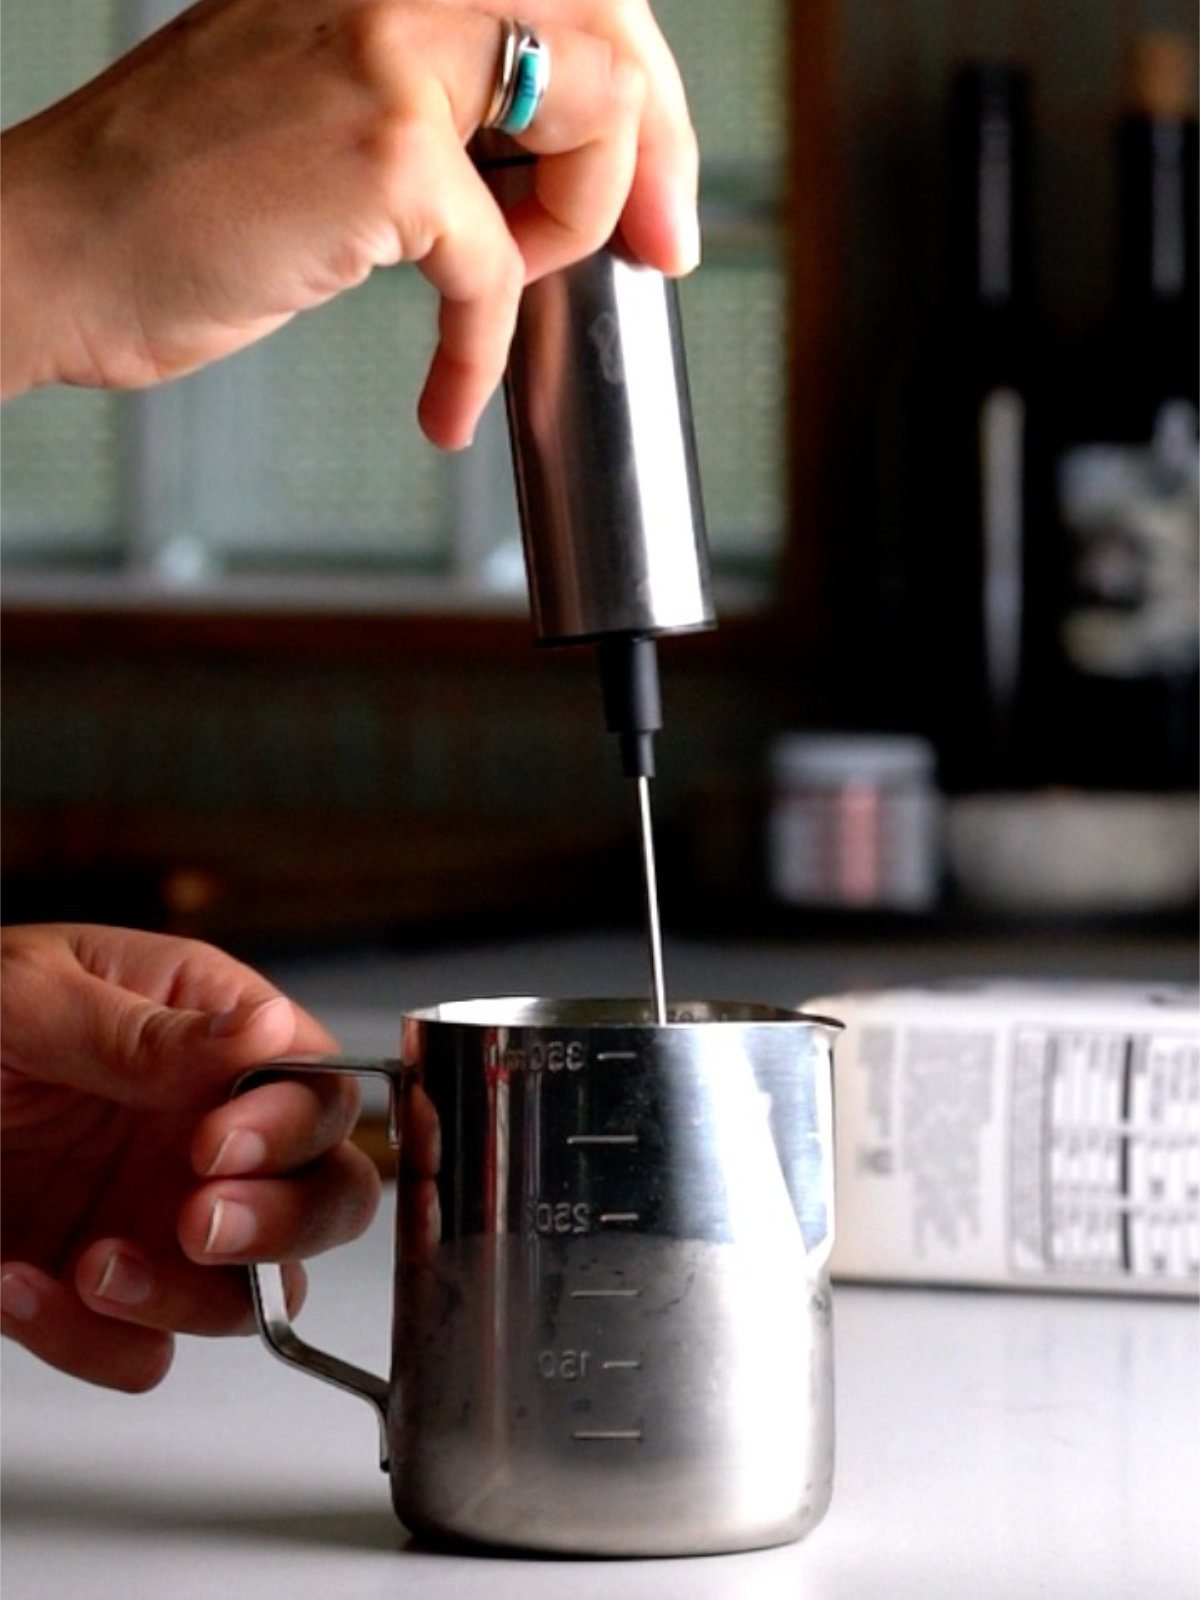 A handheld frother frothing liquid in a metal measuring cup.